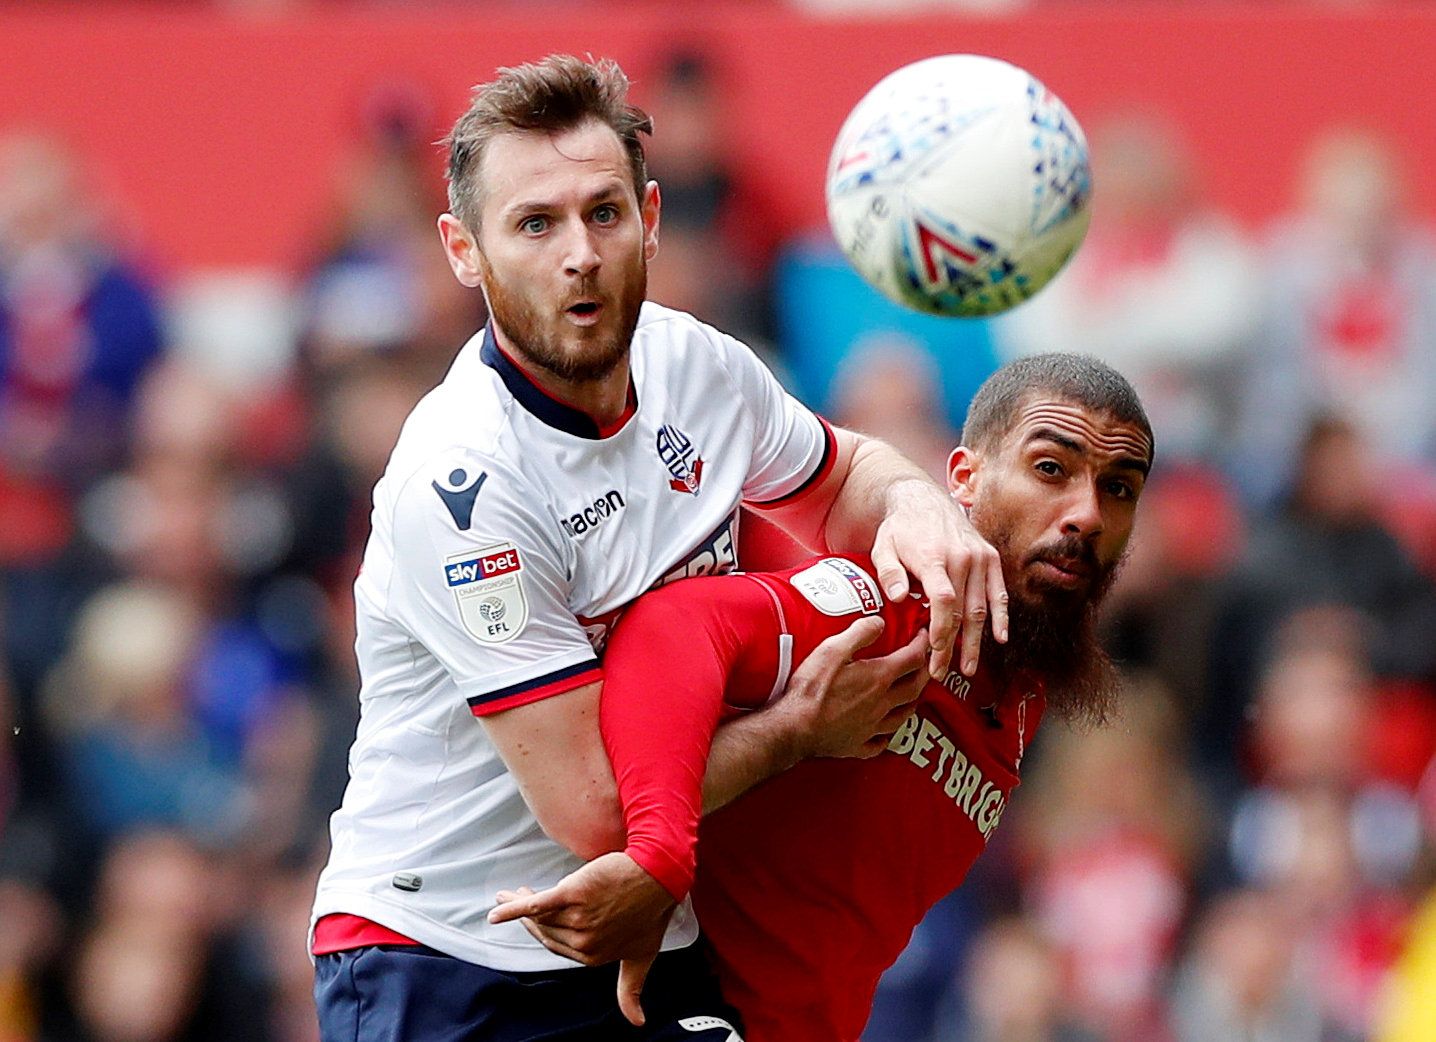 Soccer Football - Championship - Nottingham Forest v Bolton Wanderers - The City Ground, Nottingham, Britain - May 5, 2019   Nottingham Forest's Lewis Grabban in action with Bolton Wanderers' Jonathan Grounds   Action Images/Peter Cziborra    EDITORIAL USE ONLY. No use with unauthorized audio, video, data, fixture lists, club/league logos or "live" services. Online in-match use limited to 75 images, no video emulation. No use in betting, games or single club/league/player publications.  Please c